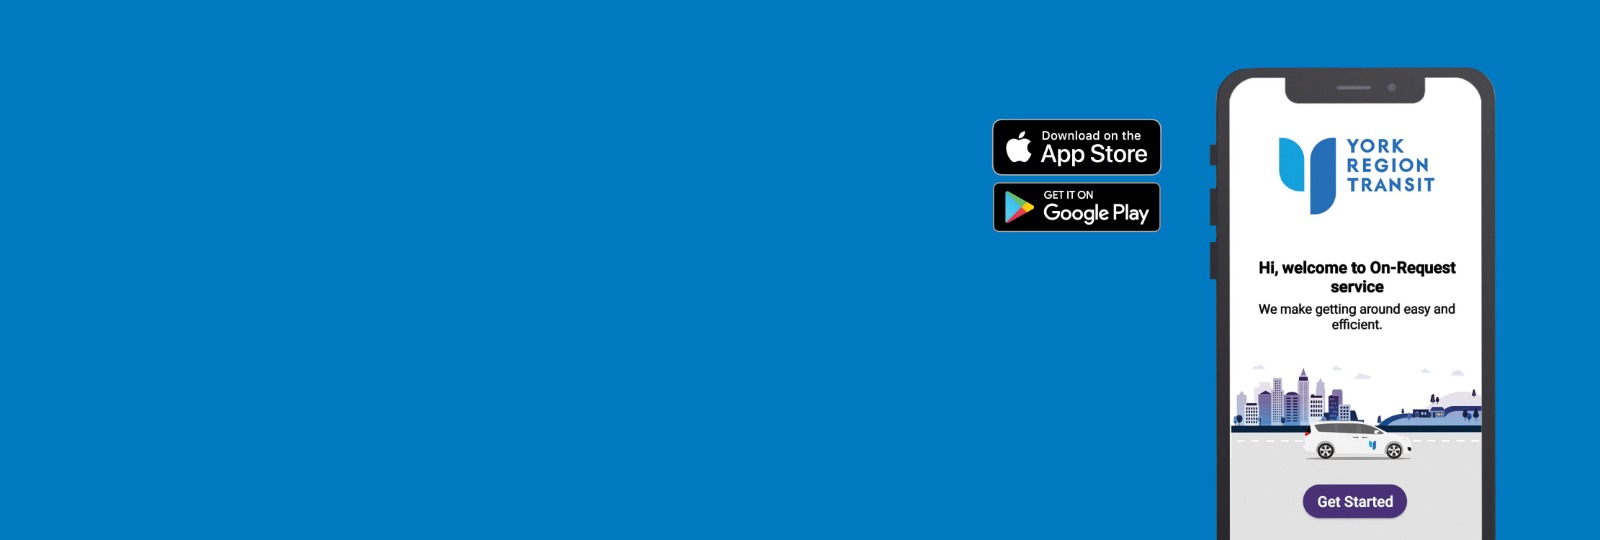 Download the new YRT On-Request mobile app